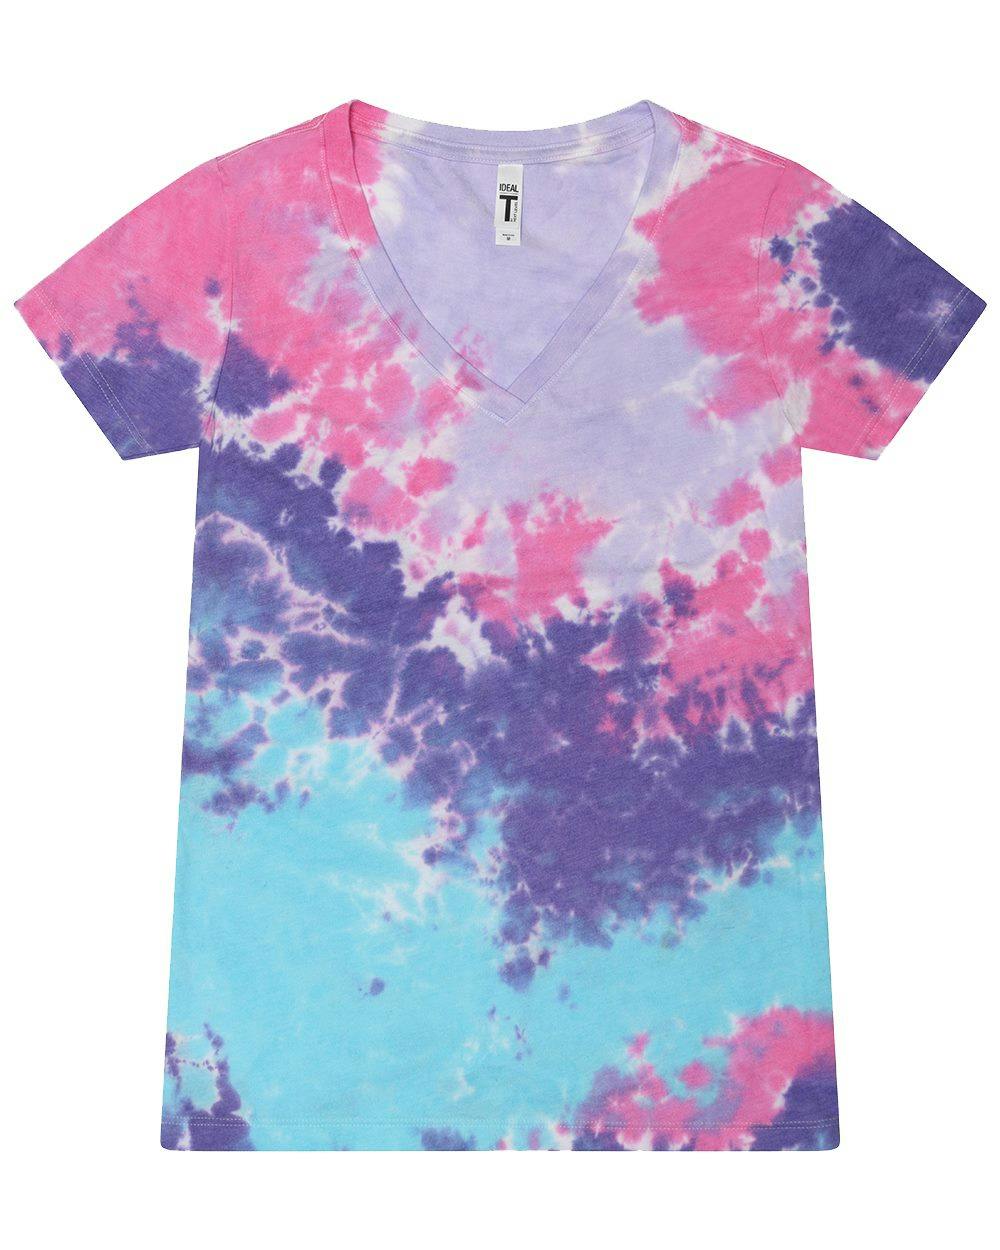 Image for Women's Tie-Dyed V-Neck T-Shirt - 1075